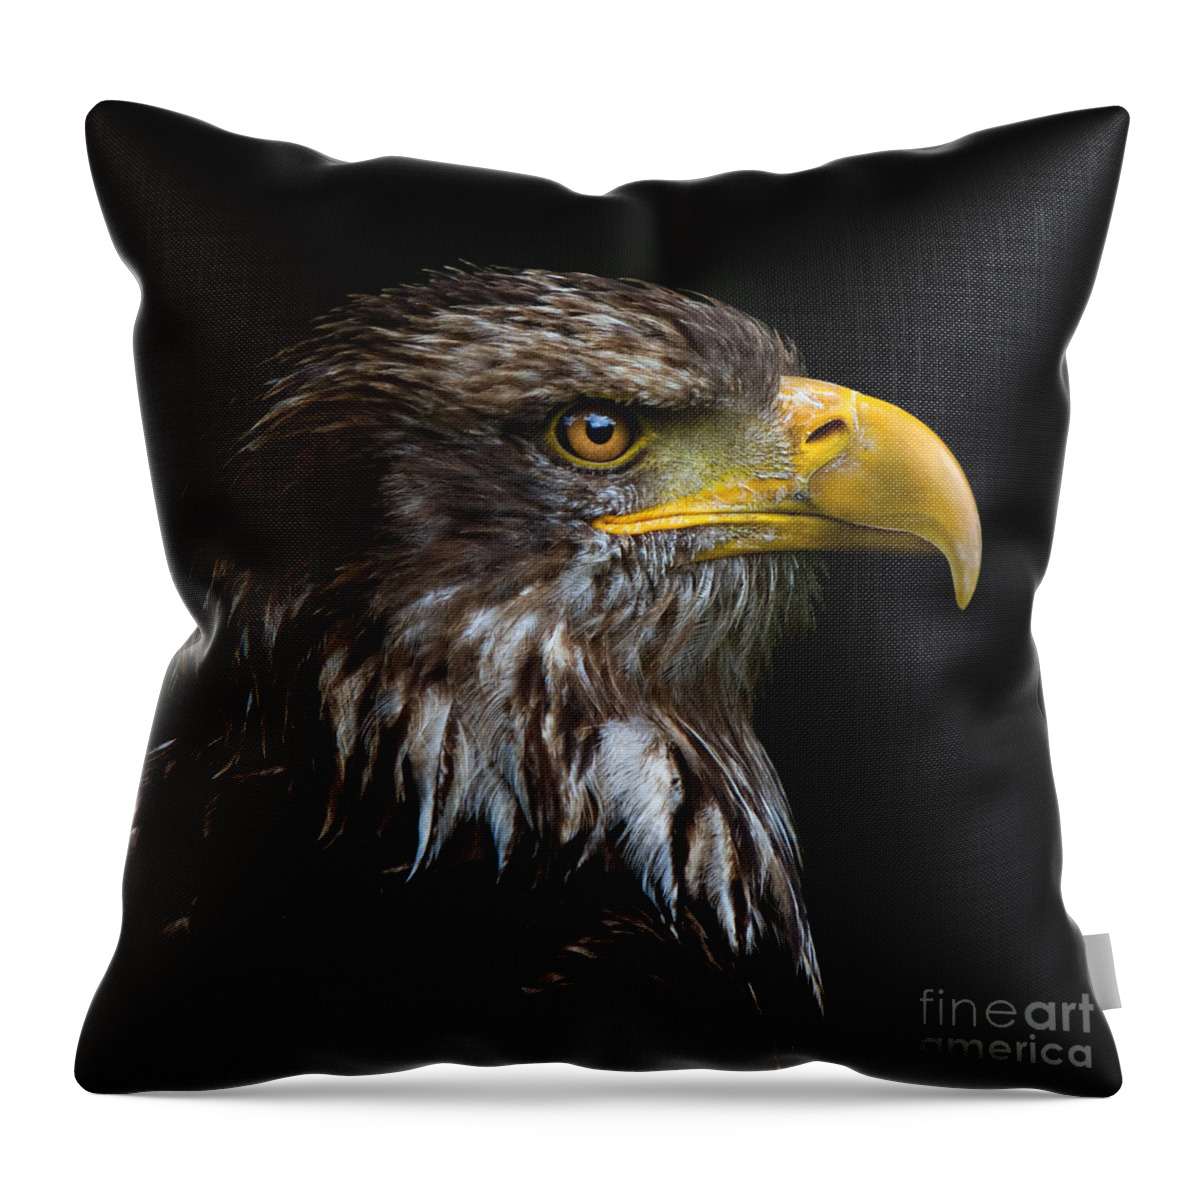 Adler Throw Pillow featuring the photograph Bald Eagle by Joerg Lingnau